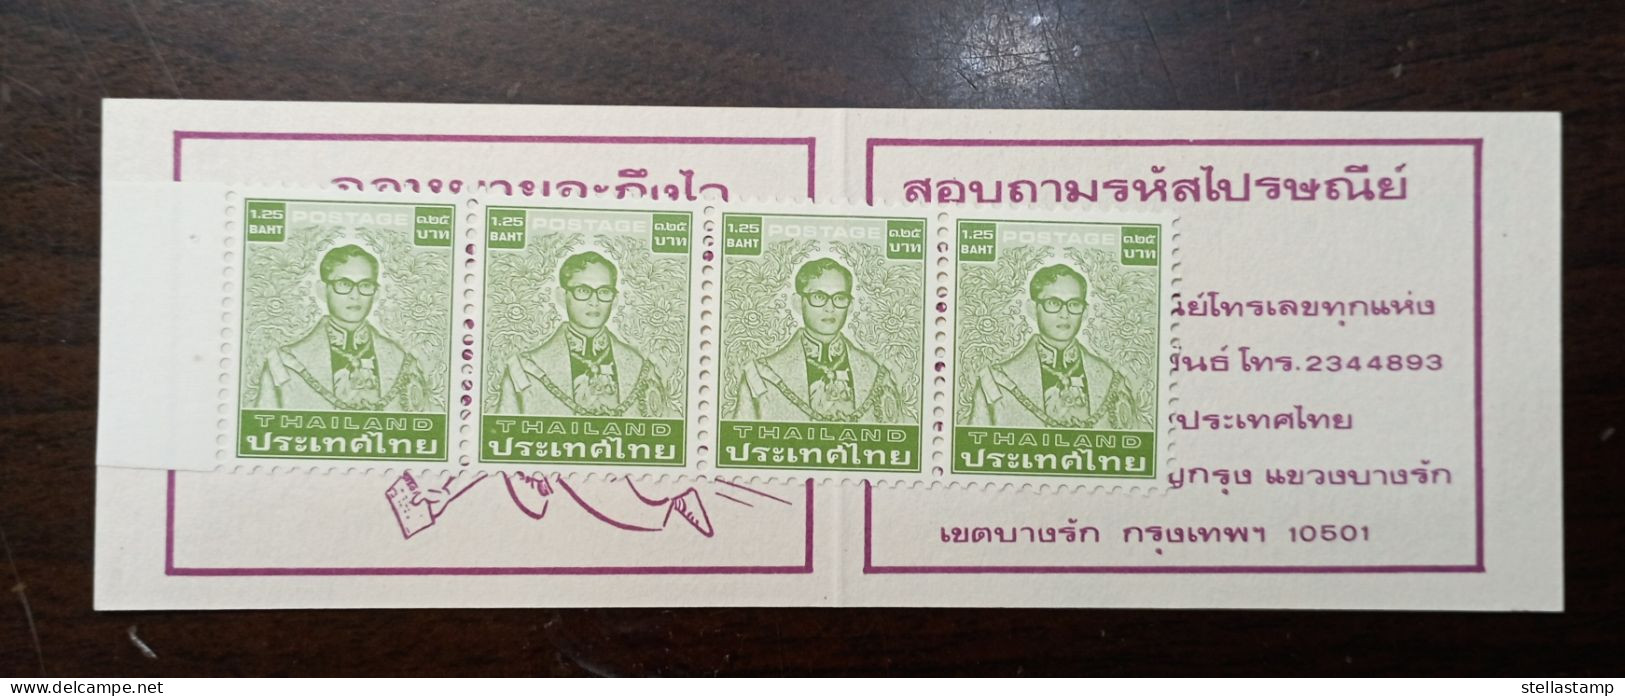 Thailand Booklet Definitive Stamp King Rama9 - 7th Series 1.25 Baht #2 - Thailand